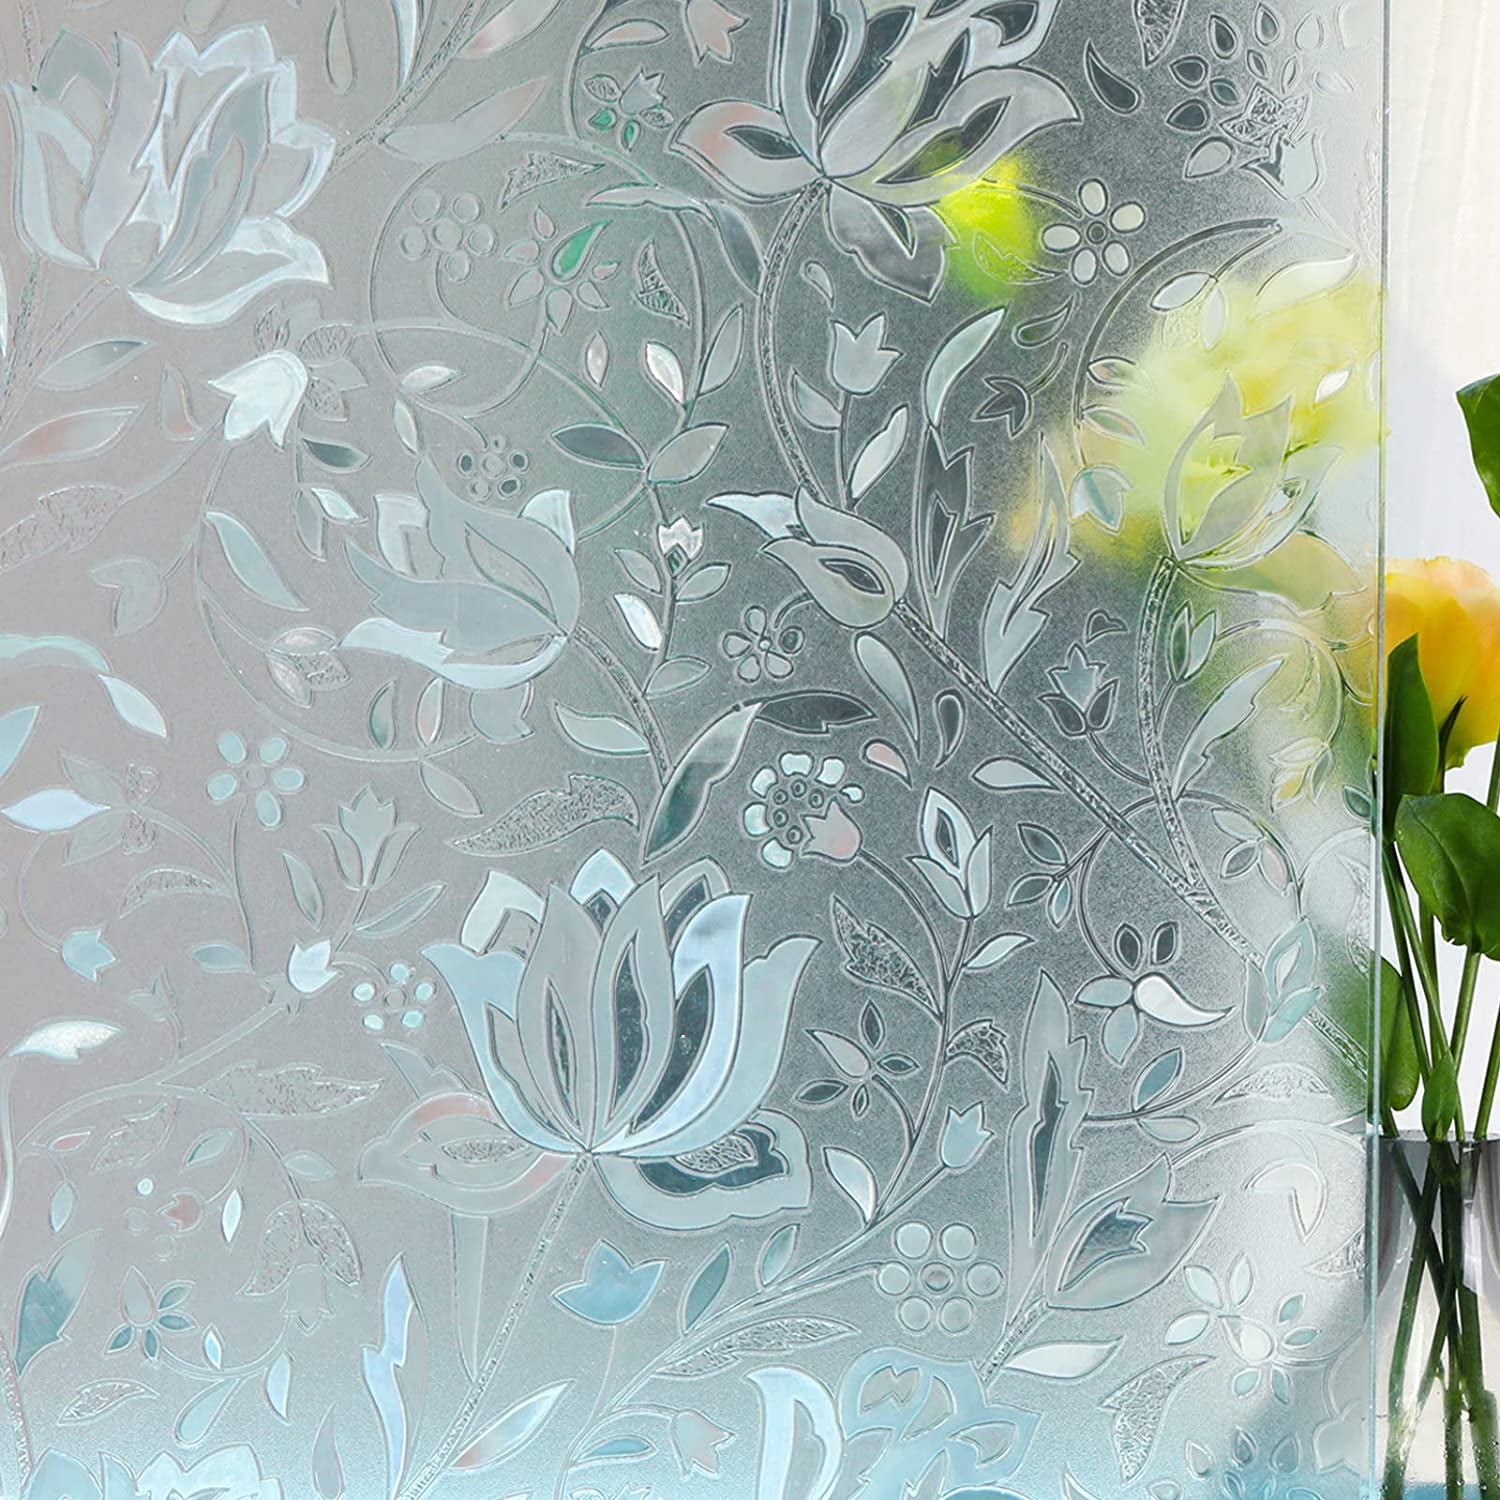 2pcs Static Cling Frosted Stained Flower Glass Window Film Sticker Privacy Deco 